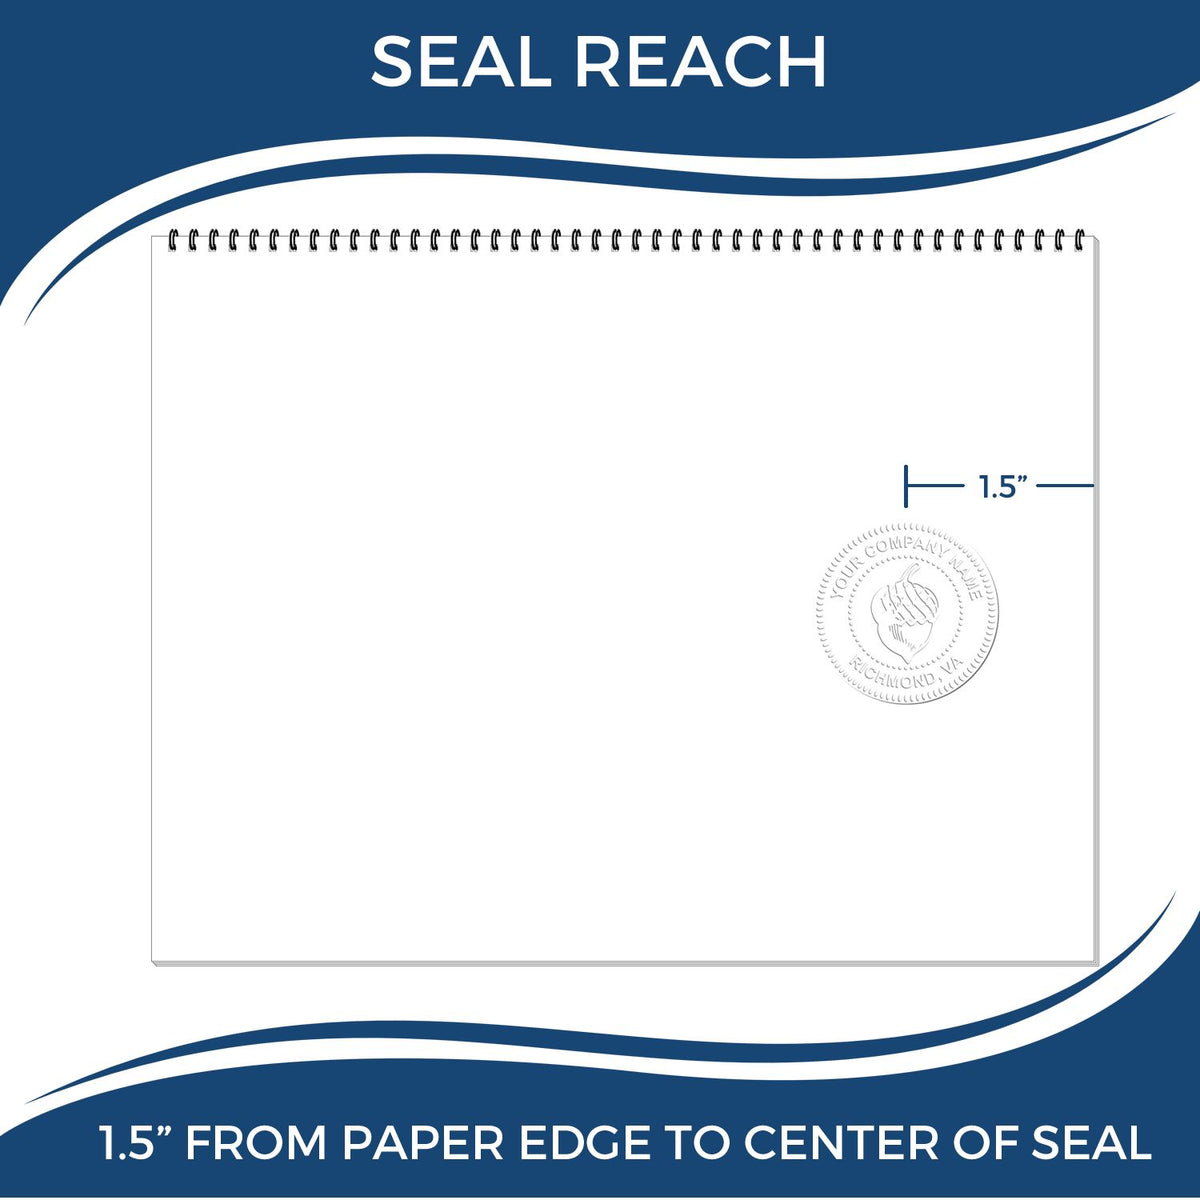 An infographic showing the seal reach which is represented by a ruler and a miniature seal image of the New Hampshire Engineer Desk Seal